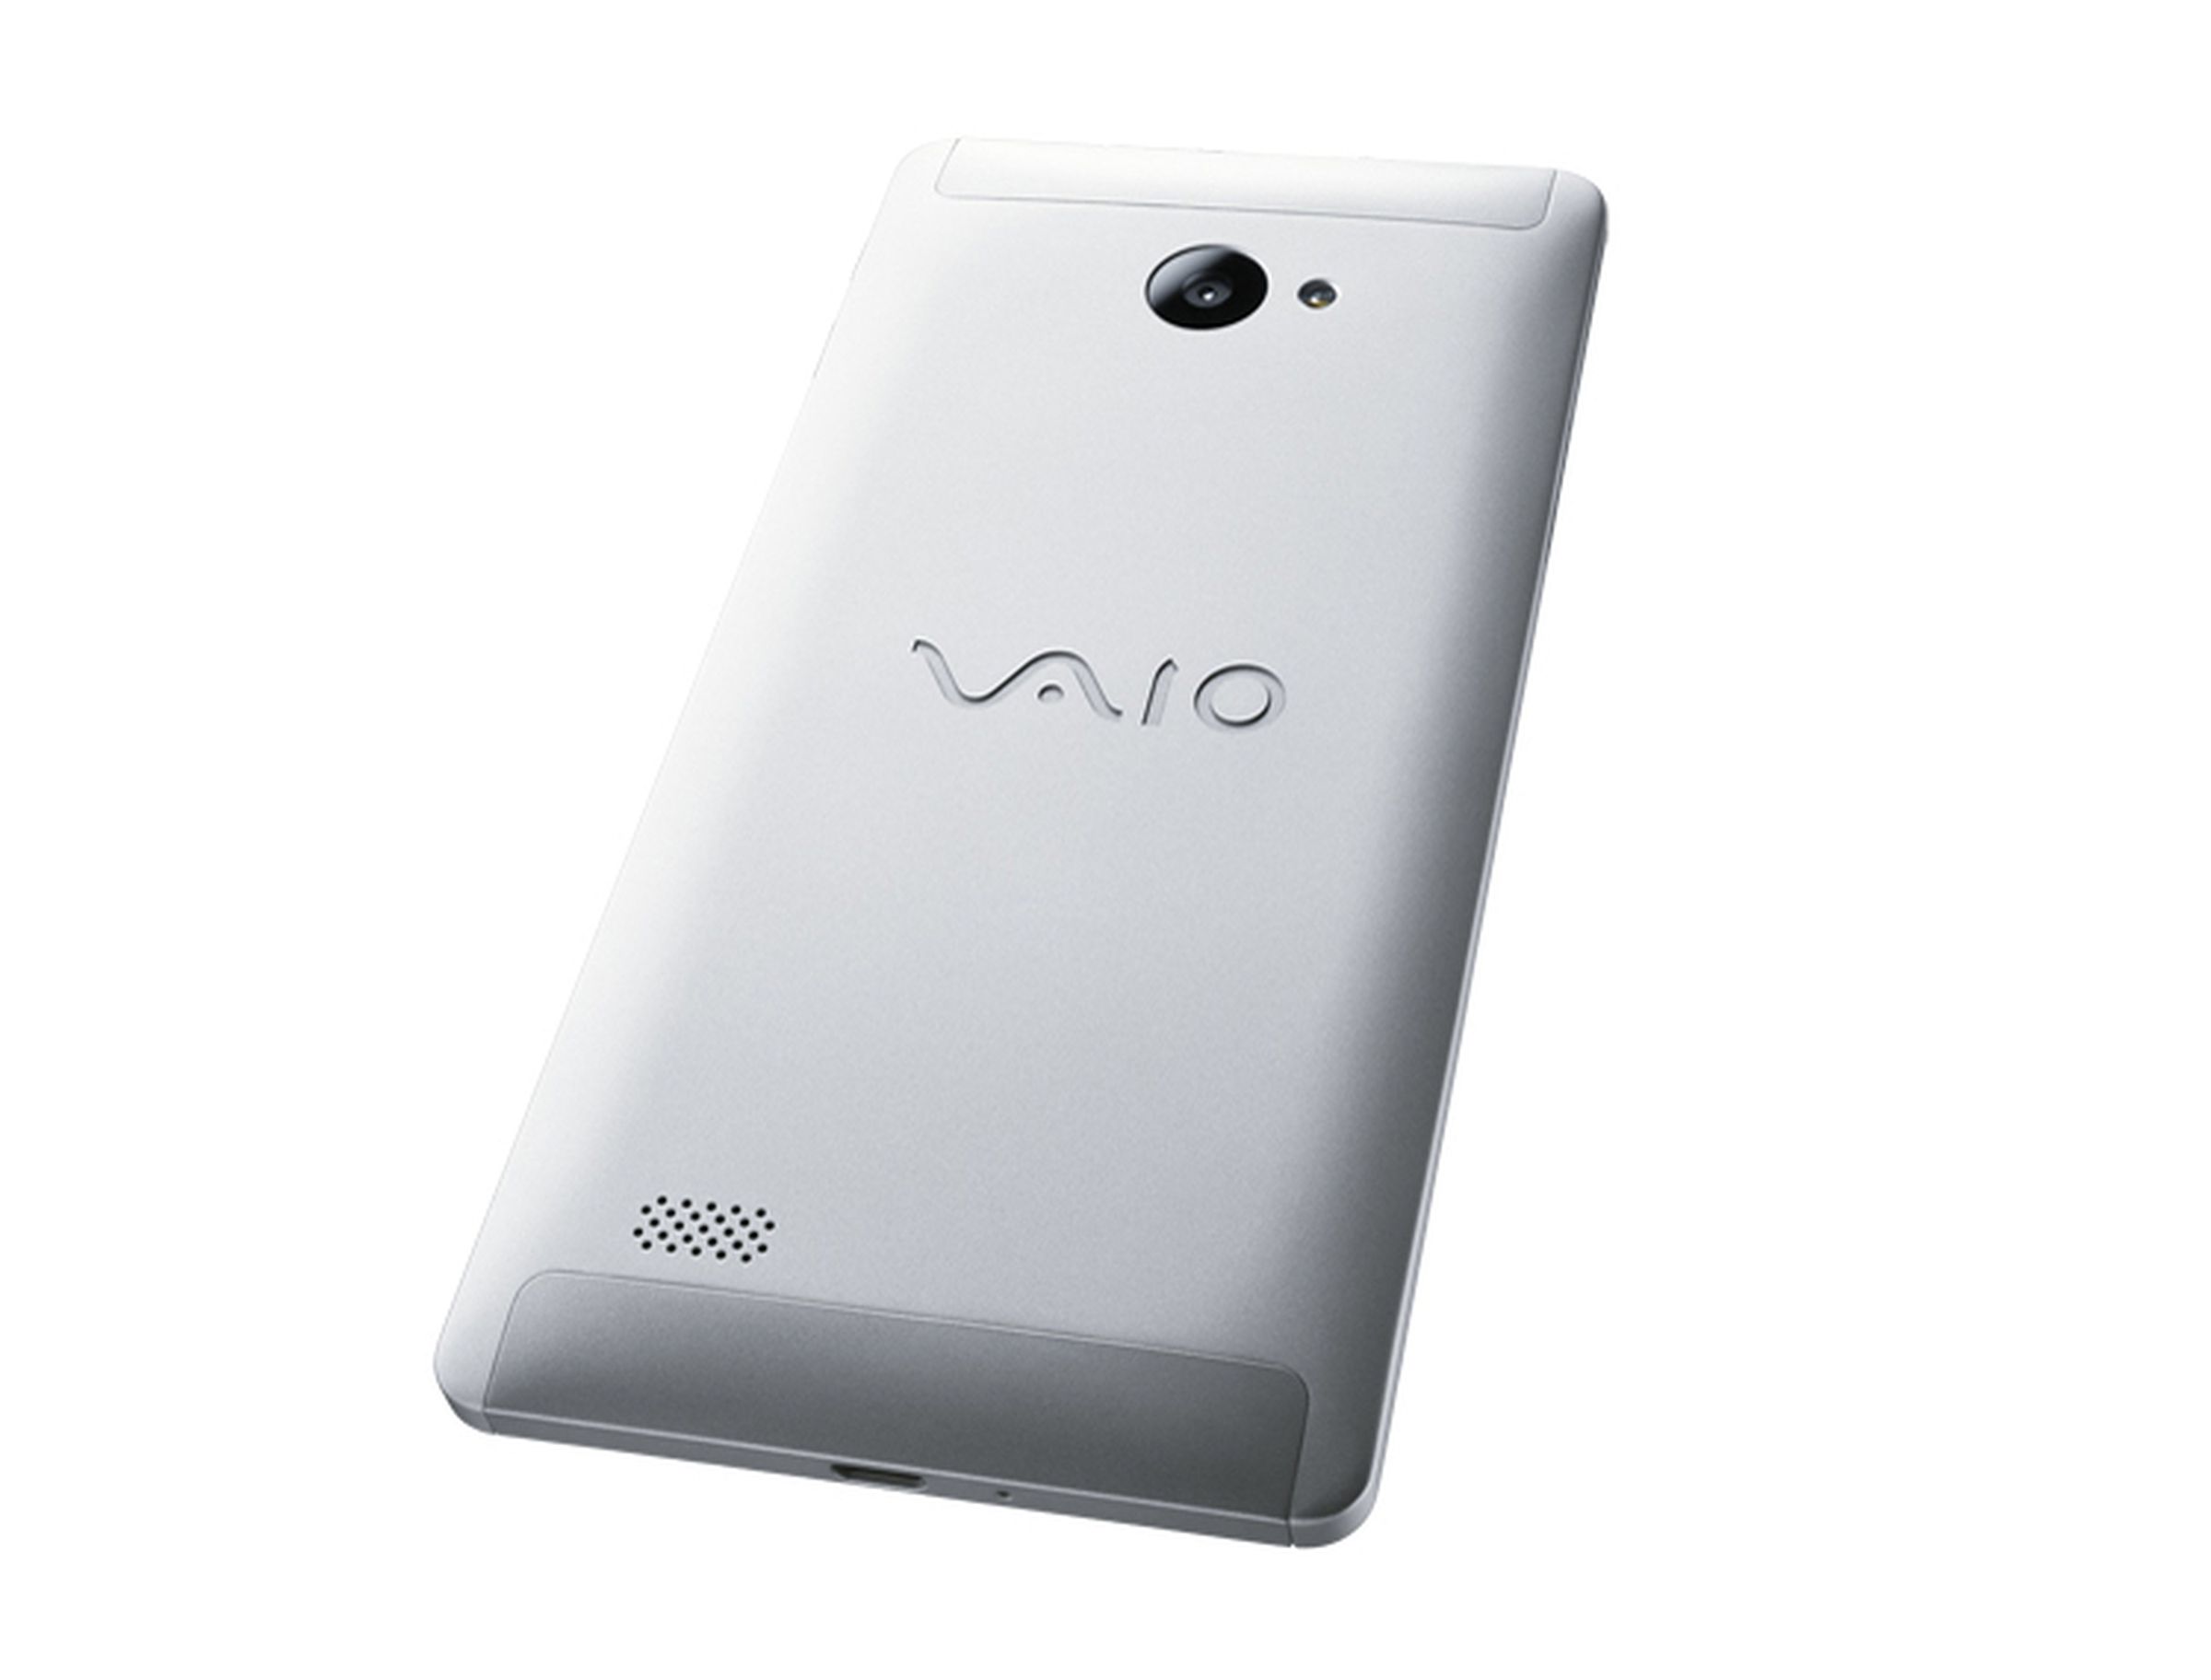 The rear of the VAIO Phone A (or is it the VAIO Phone Biz?)